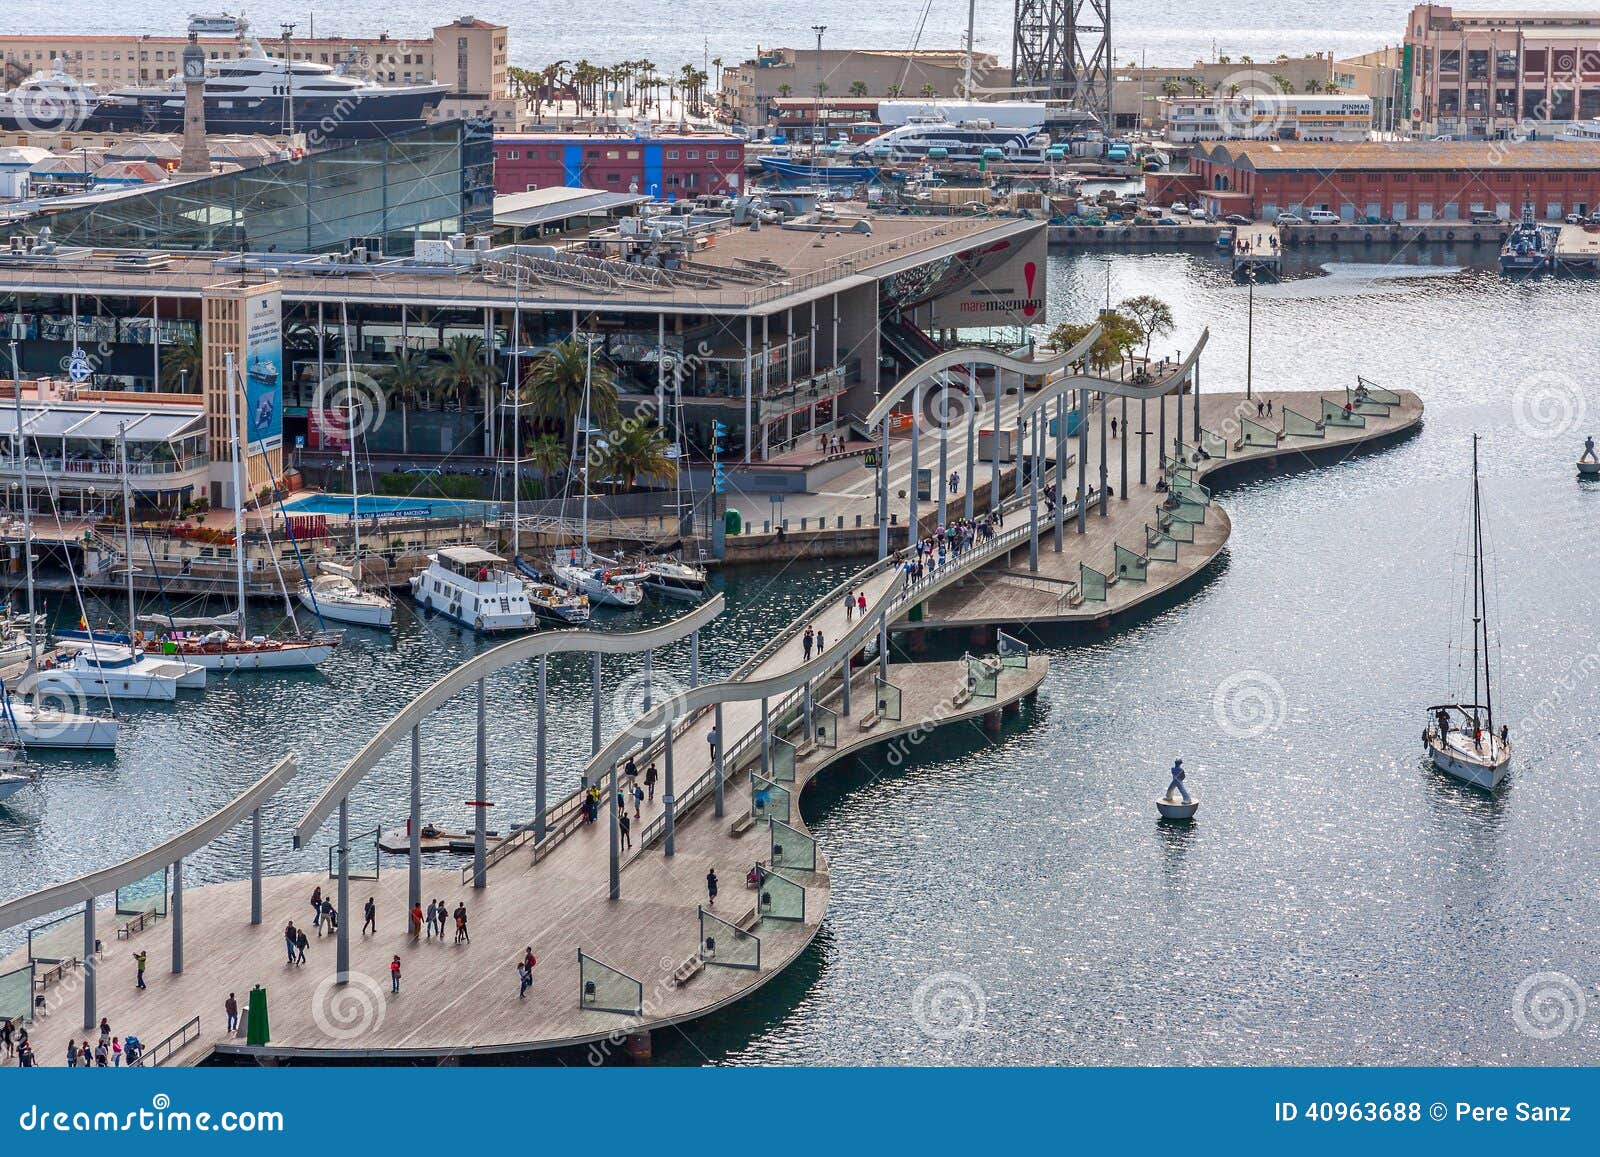 Port Vell In Barcelona Editorial Stock Photo - Image: 409636881300 x 957